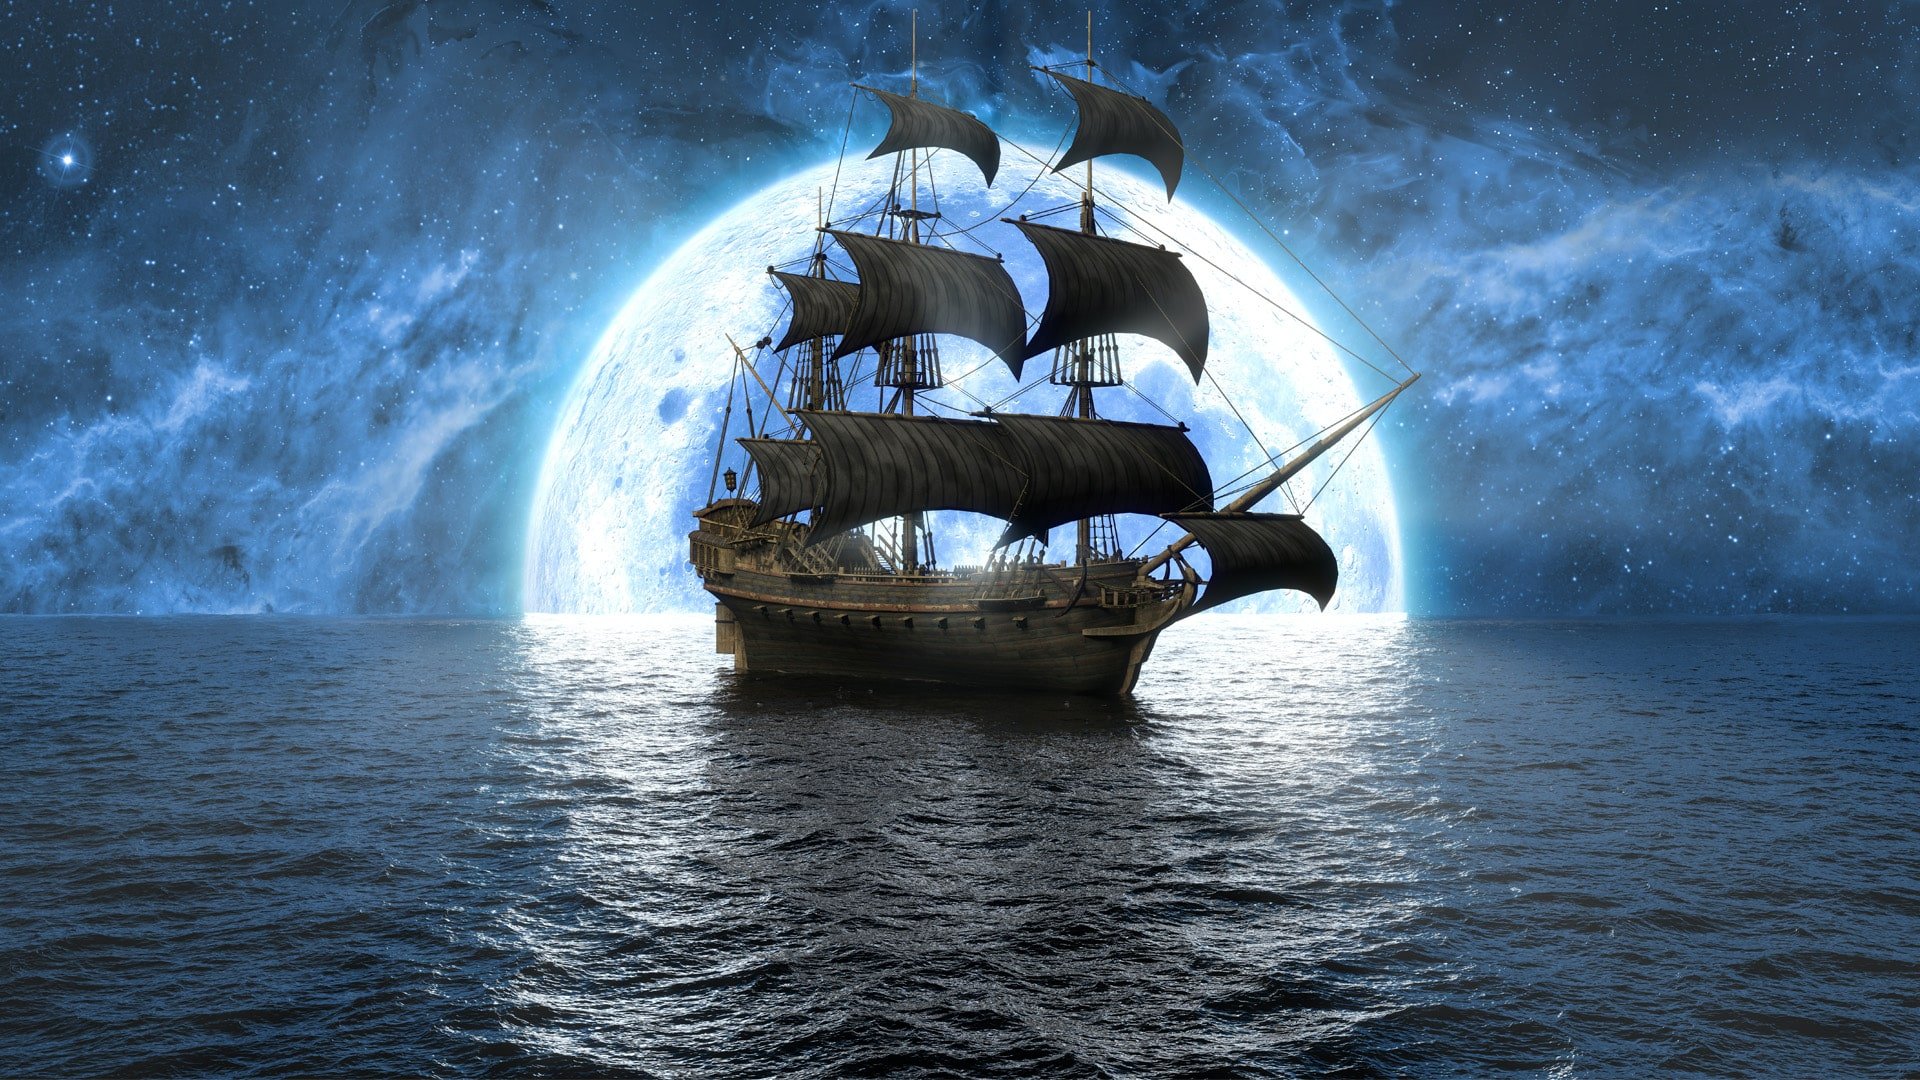 Forget the Flying Dutchman, these creepy ghost ships are completely real. Sky HISTORY TV Channel